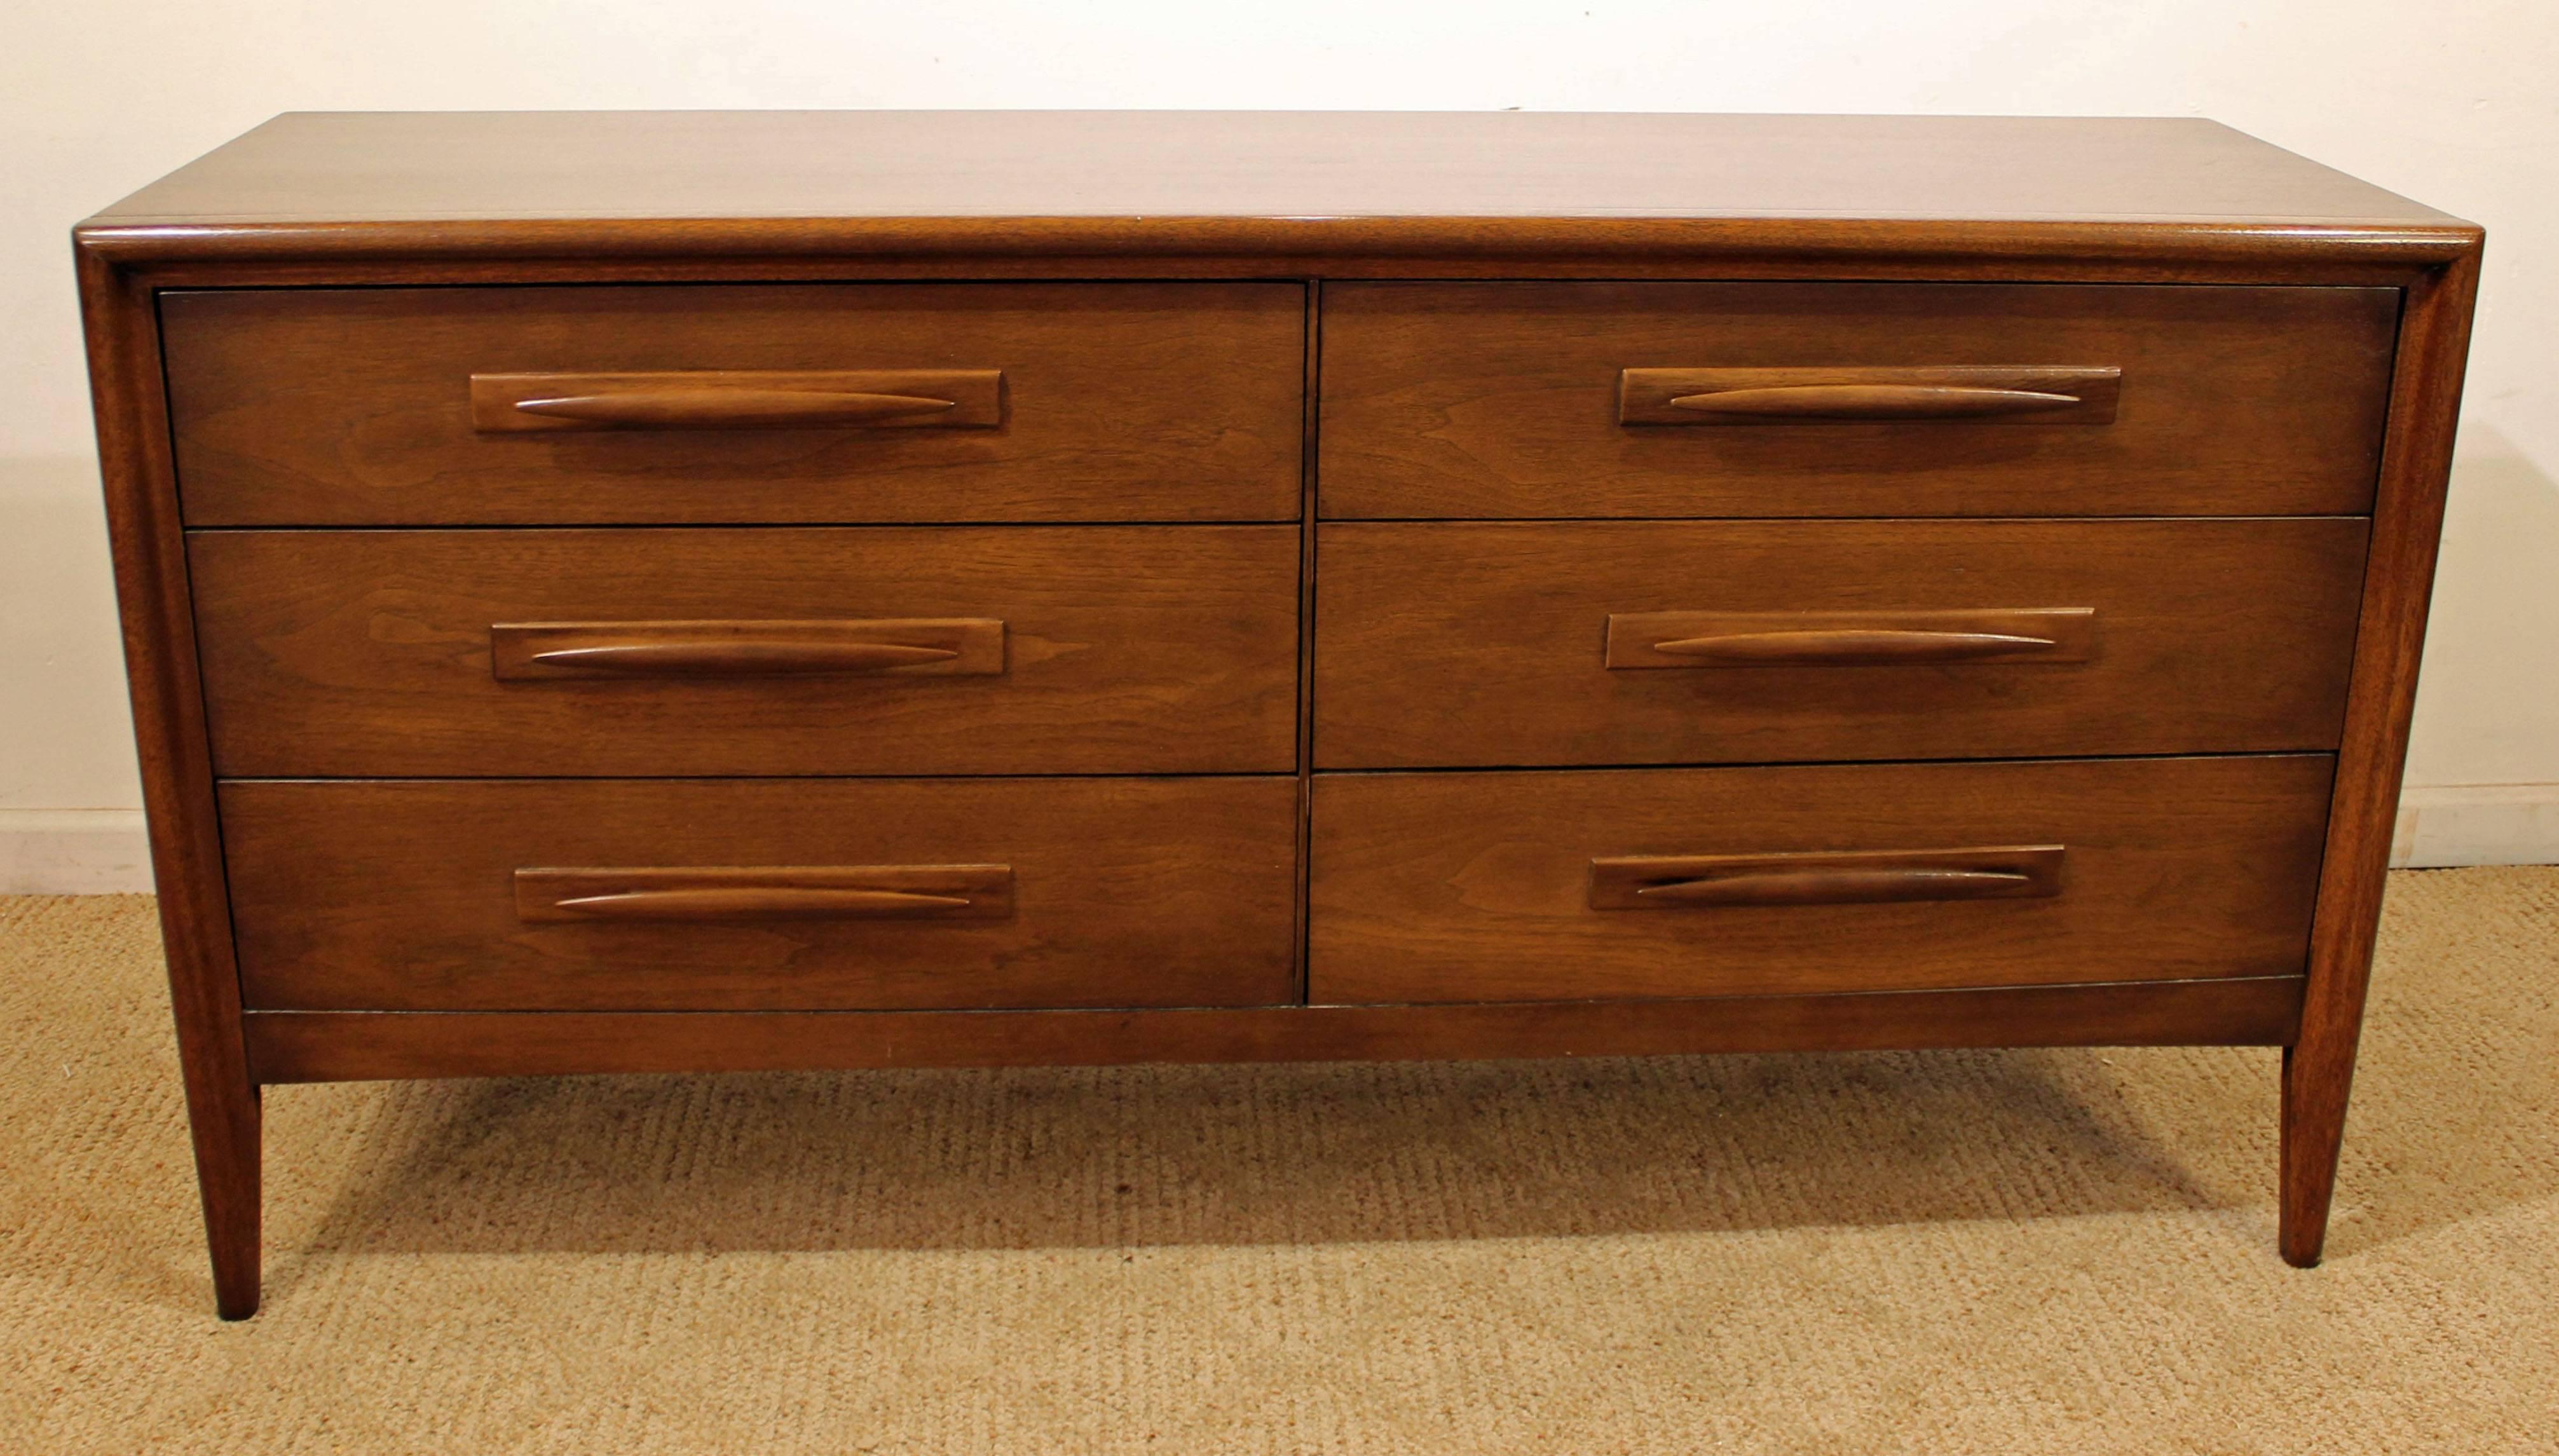 Offered is a walnut dresser by Broyhill 